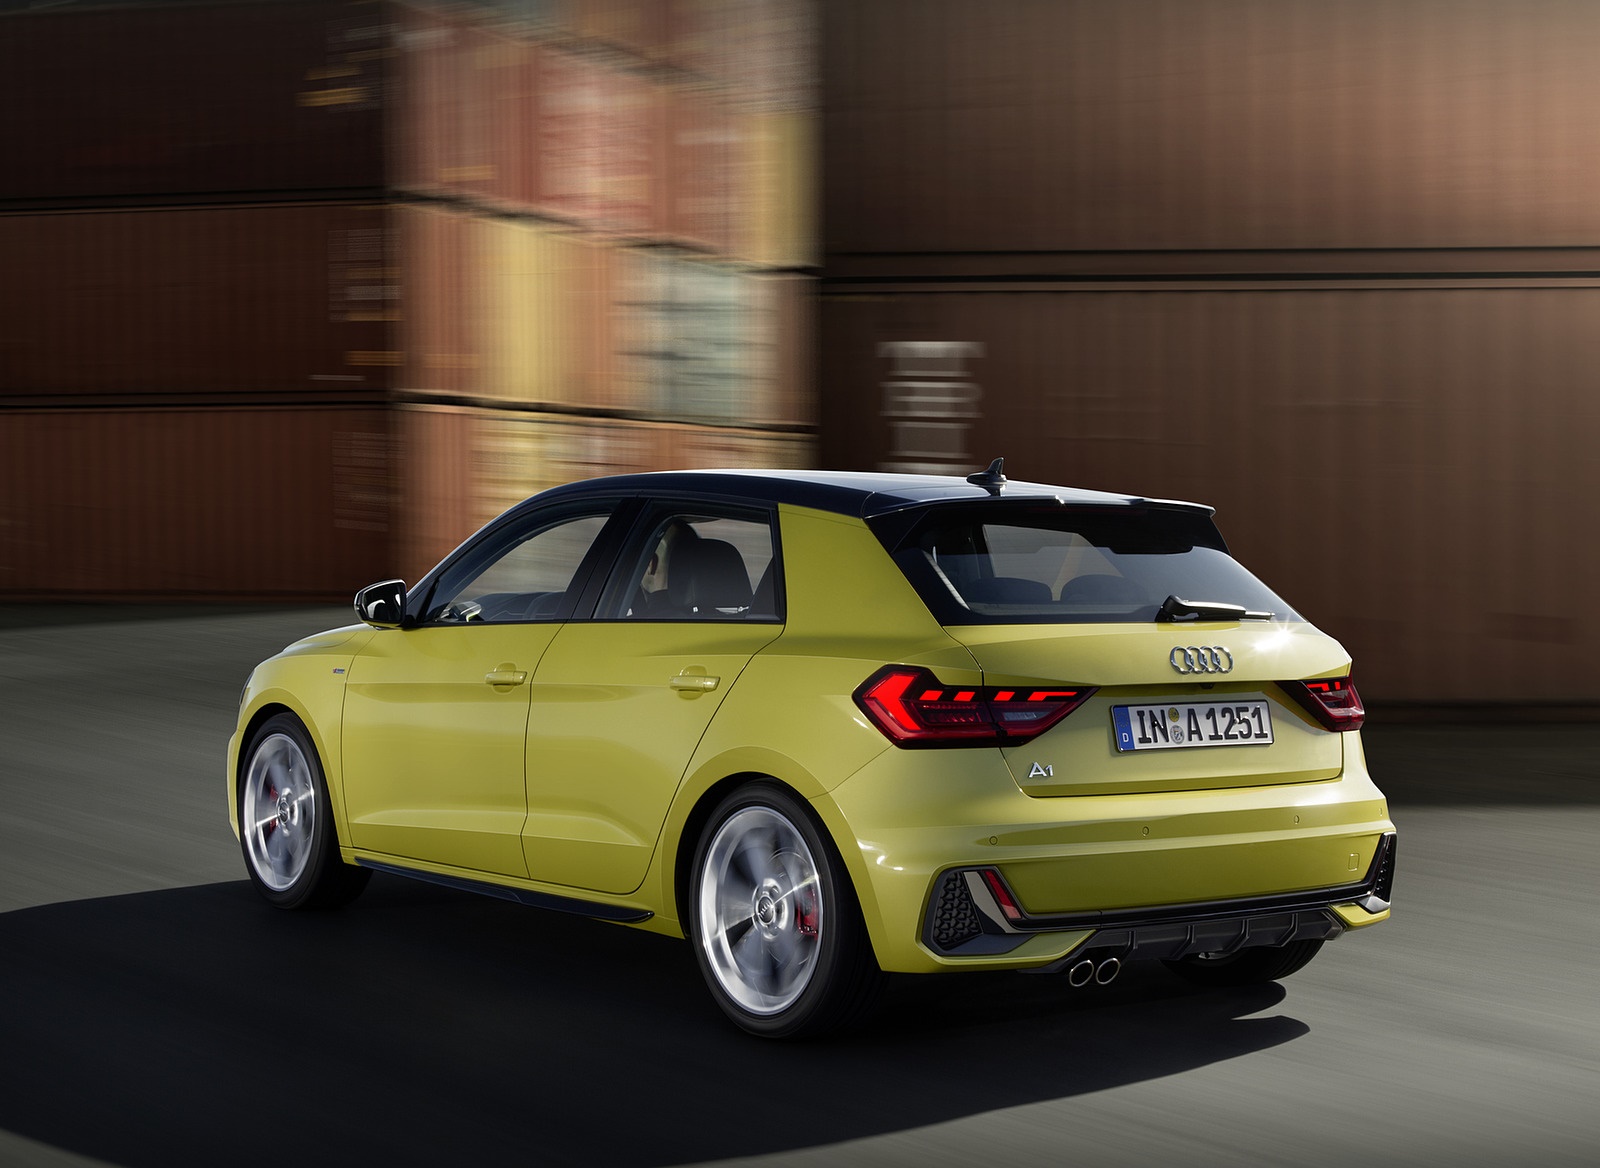 2019 Audi A1 Sportback (Color: Python Yellow) Rear Three-Quarter Wallpapers #22 of 31